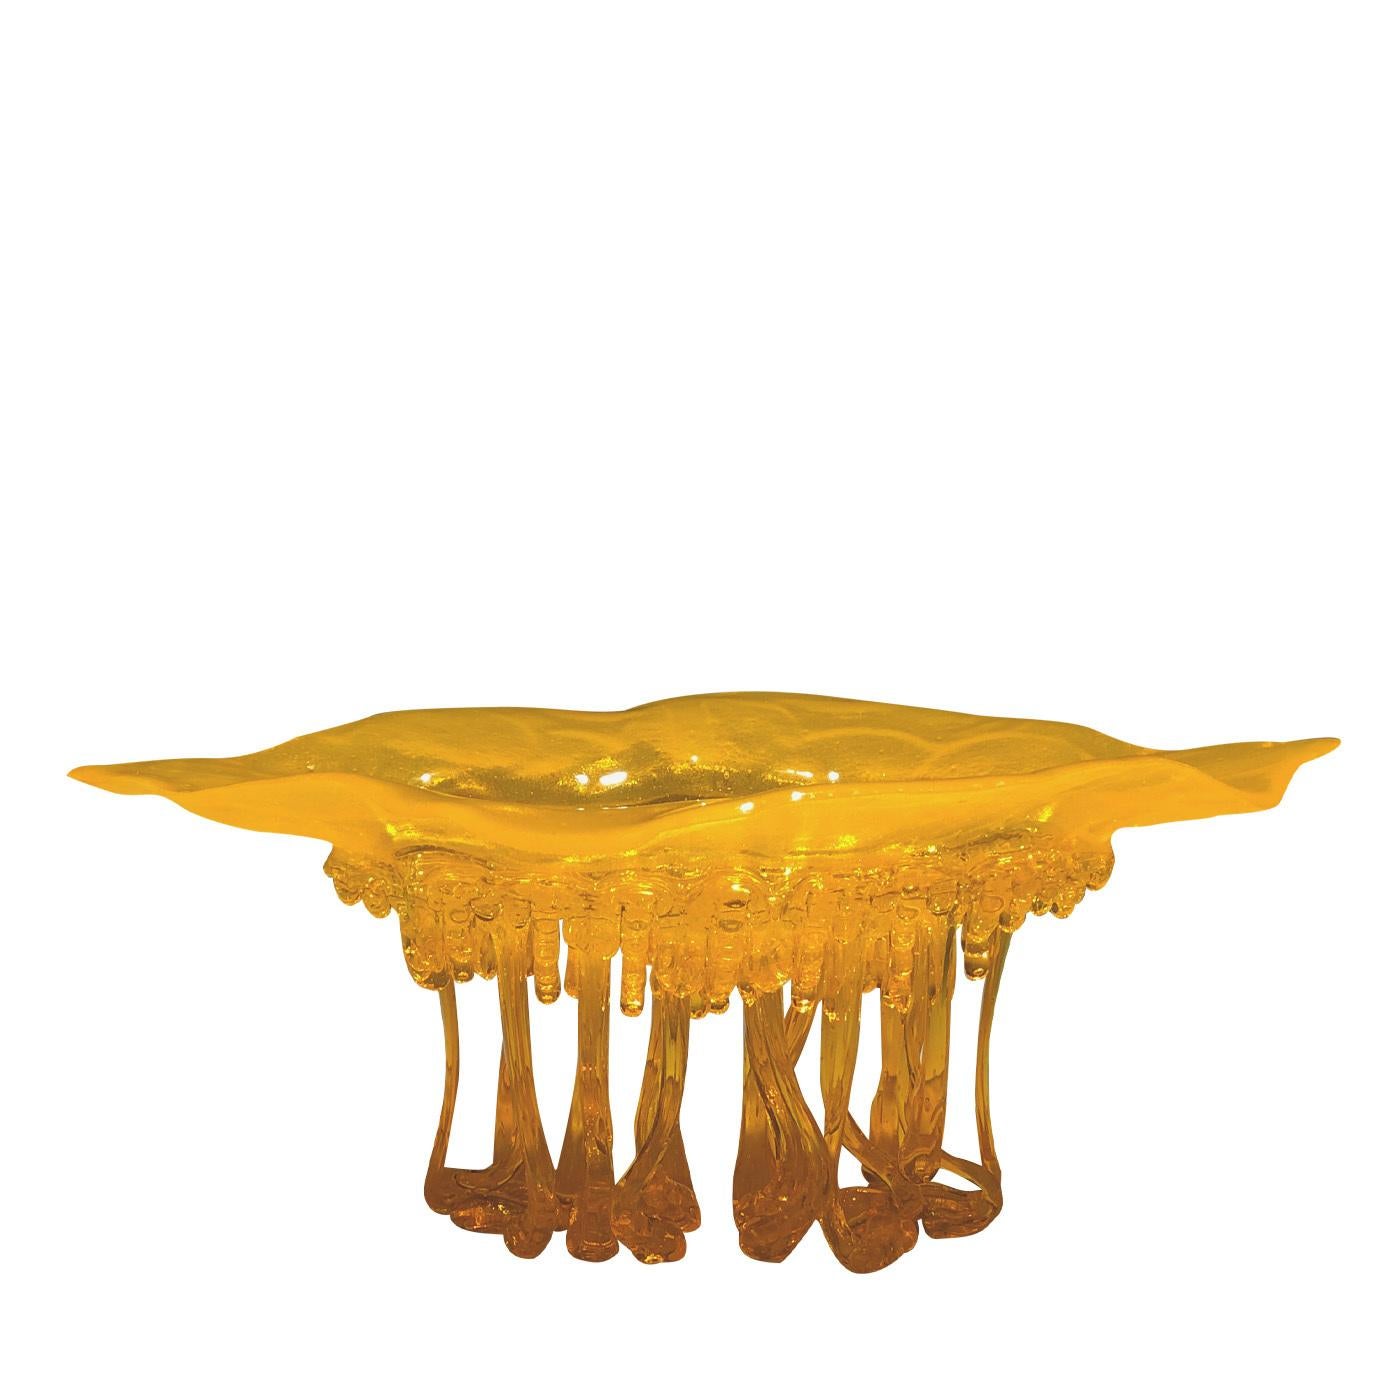 The pure gold hues of this gorgeous, honey-colored sculpture is made exclusively from Murano glass. Its unique shape with its upturned top and many tentacle-shaped dripping forms underneath is reminiscent of a jellyfish and its tentacles. Light